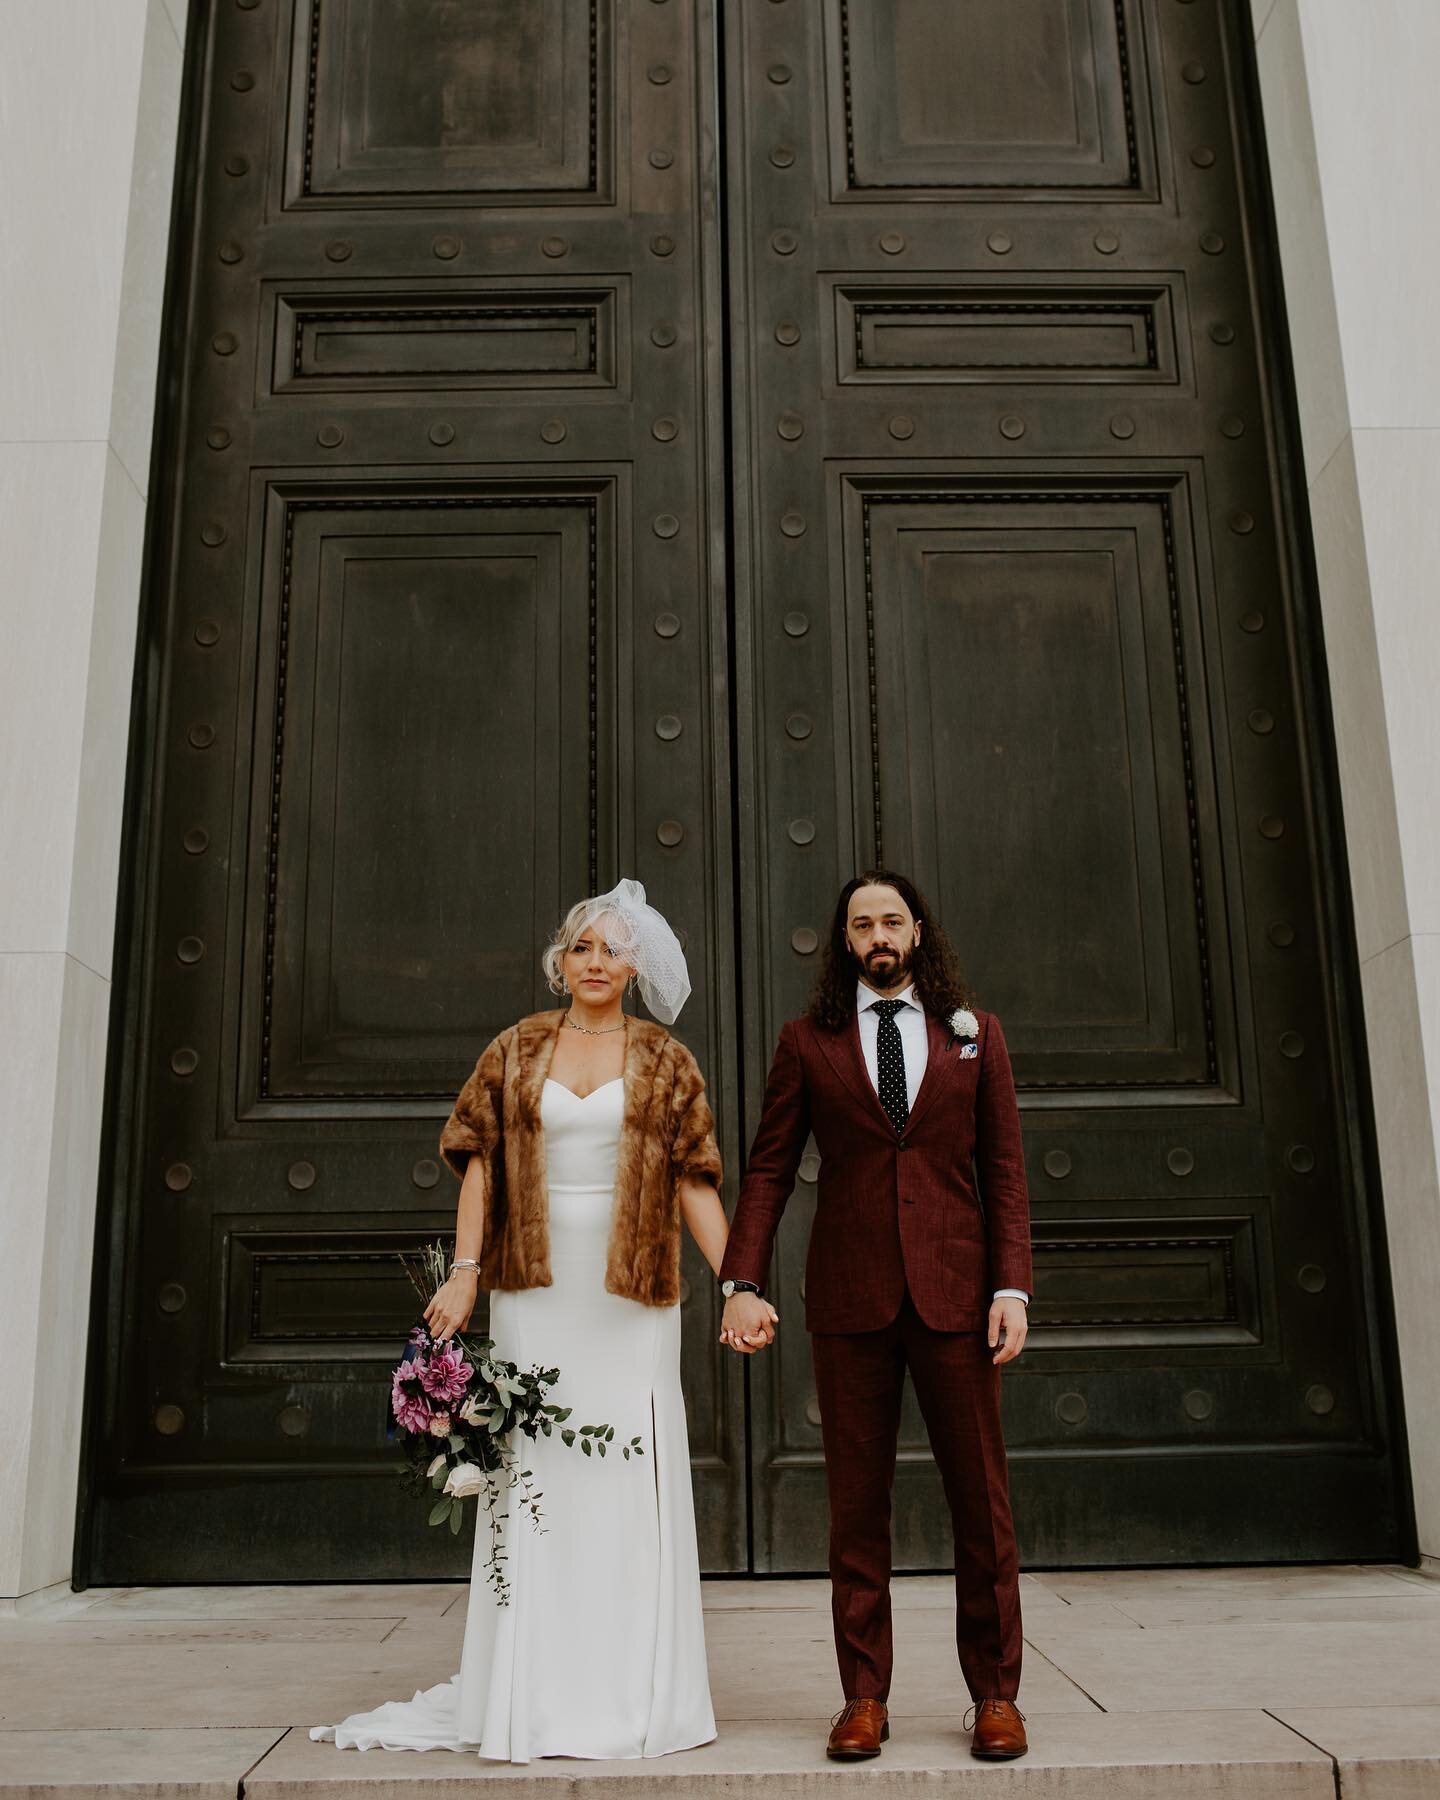 The thing I love about DC is that you always find beautiful locations to photograph in. It never gets old. 🤗😍🧡

These two were so stylish on their wedding day! We love to see it 😍